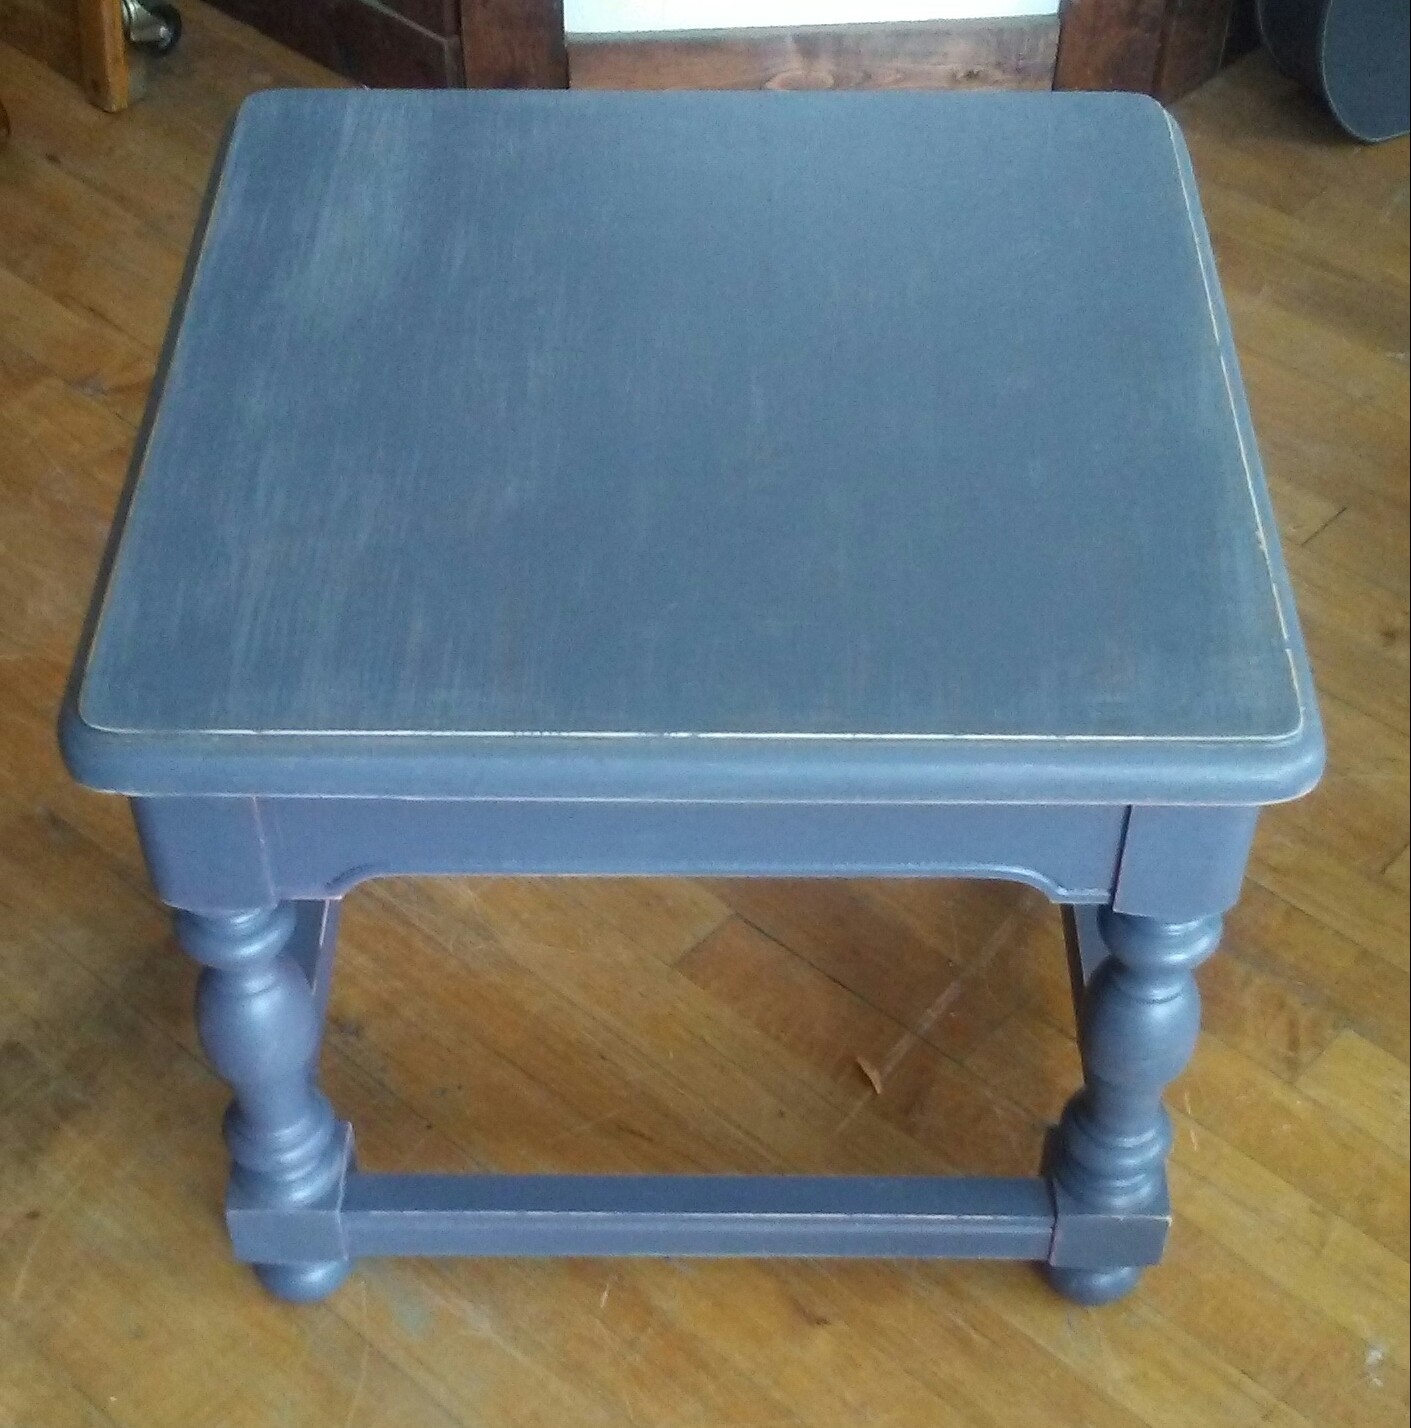 dark gray painted end table shabby chic accent for ori charcoal blue refurbished vintage and slightly distressed this looks great country farmhouse primitive traditional ashley